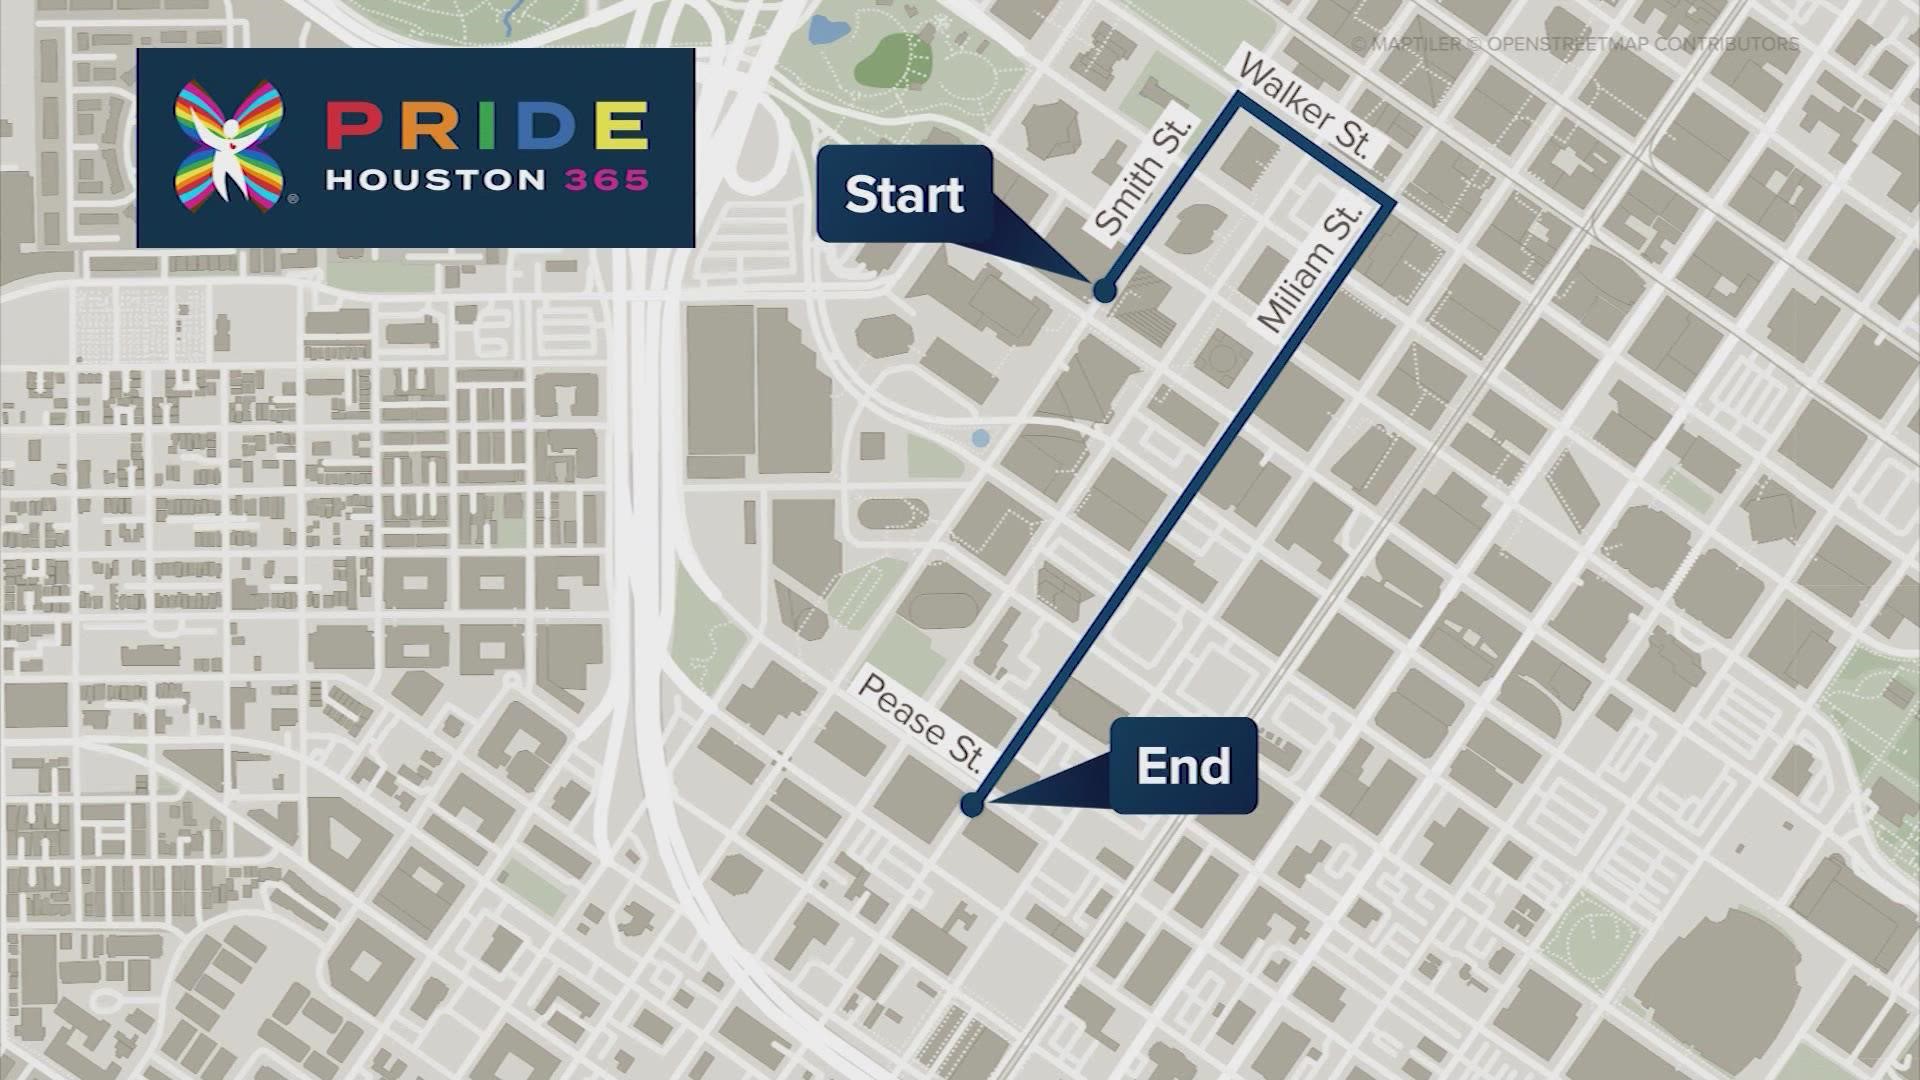 The Pride Houston parade and festival are happening this weekend. There's a long list of street closures that you need to be aware of whether you're attending or not